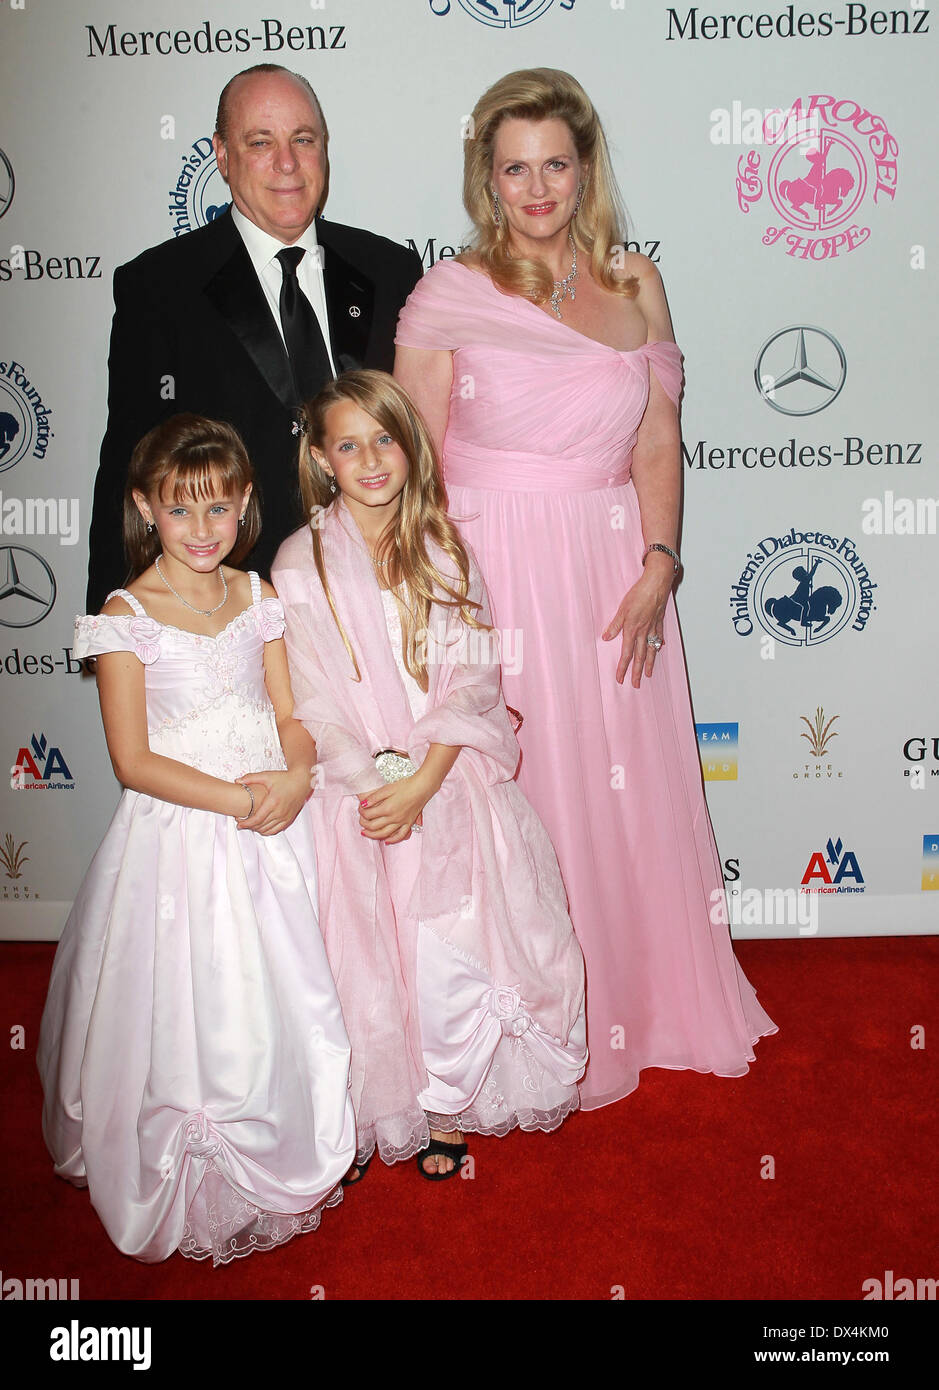 Nancy Davis husband Ken Rickel with daughters Isabella Rickel and Ariana Rickel 26th Anniversary Carousel Of Hope Ball - Presented By Mercedes-Benz - Arrivals Los Angeles, California - 20.10.12 Where: Beverly Hills, California, United States When: 20 Oct 2012 Stock Photo